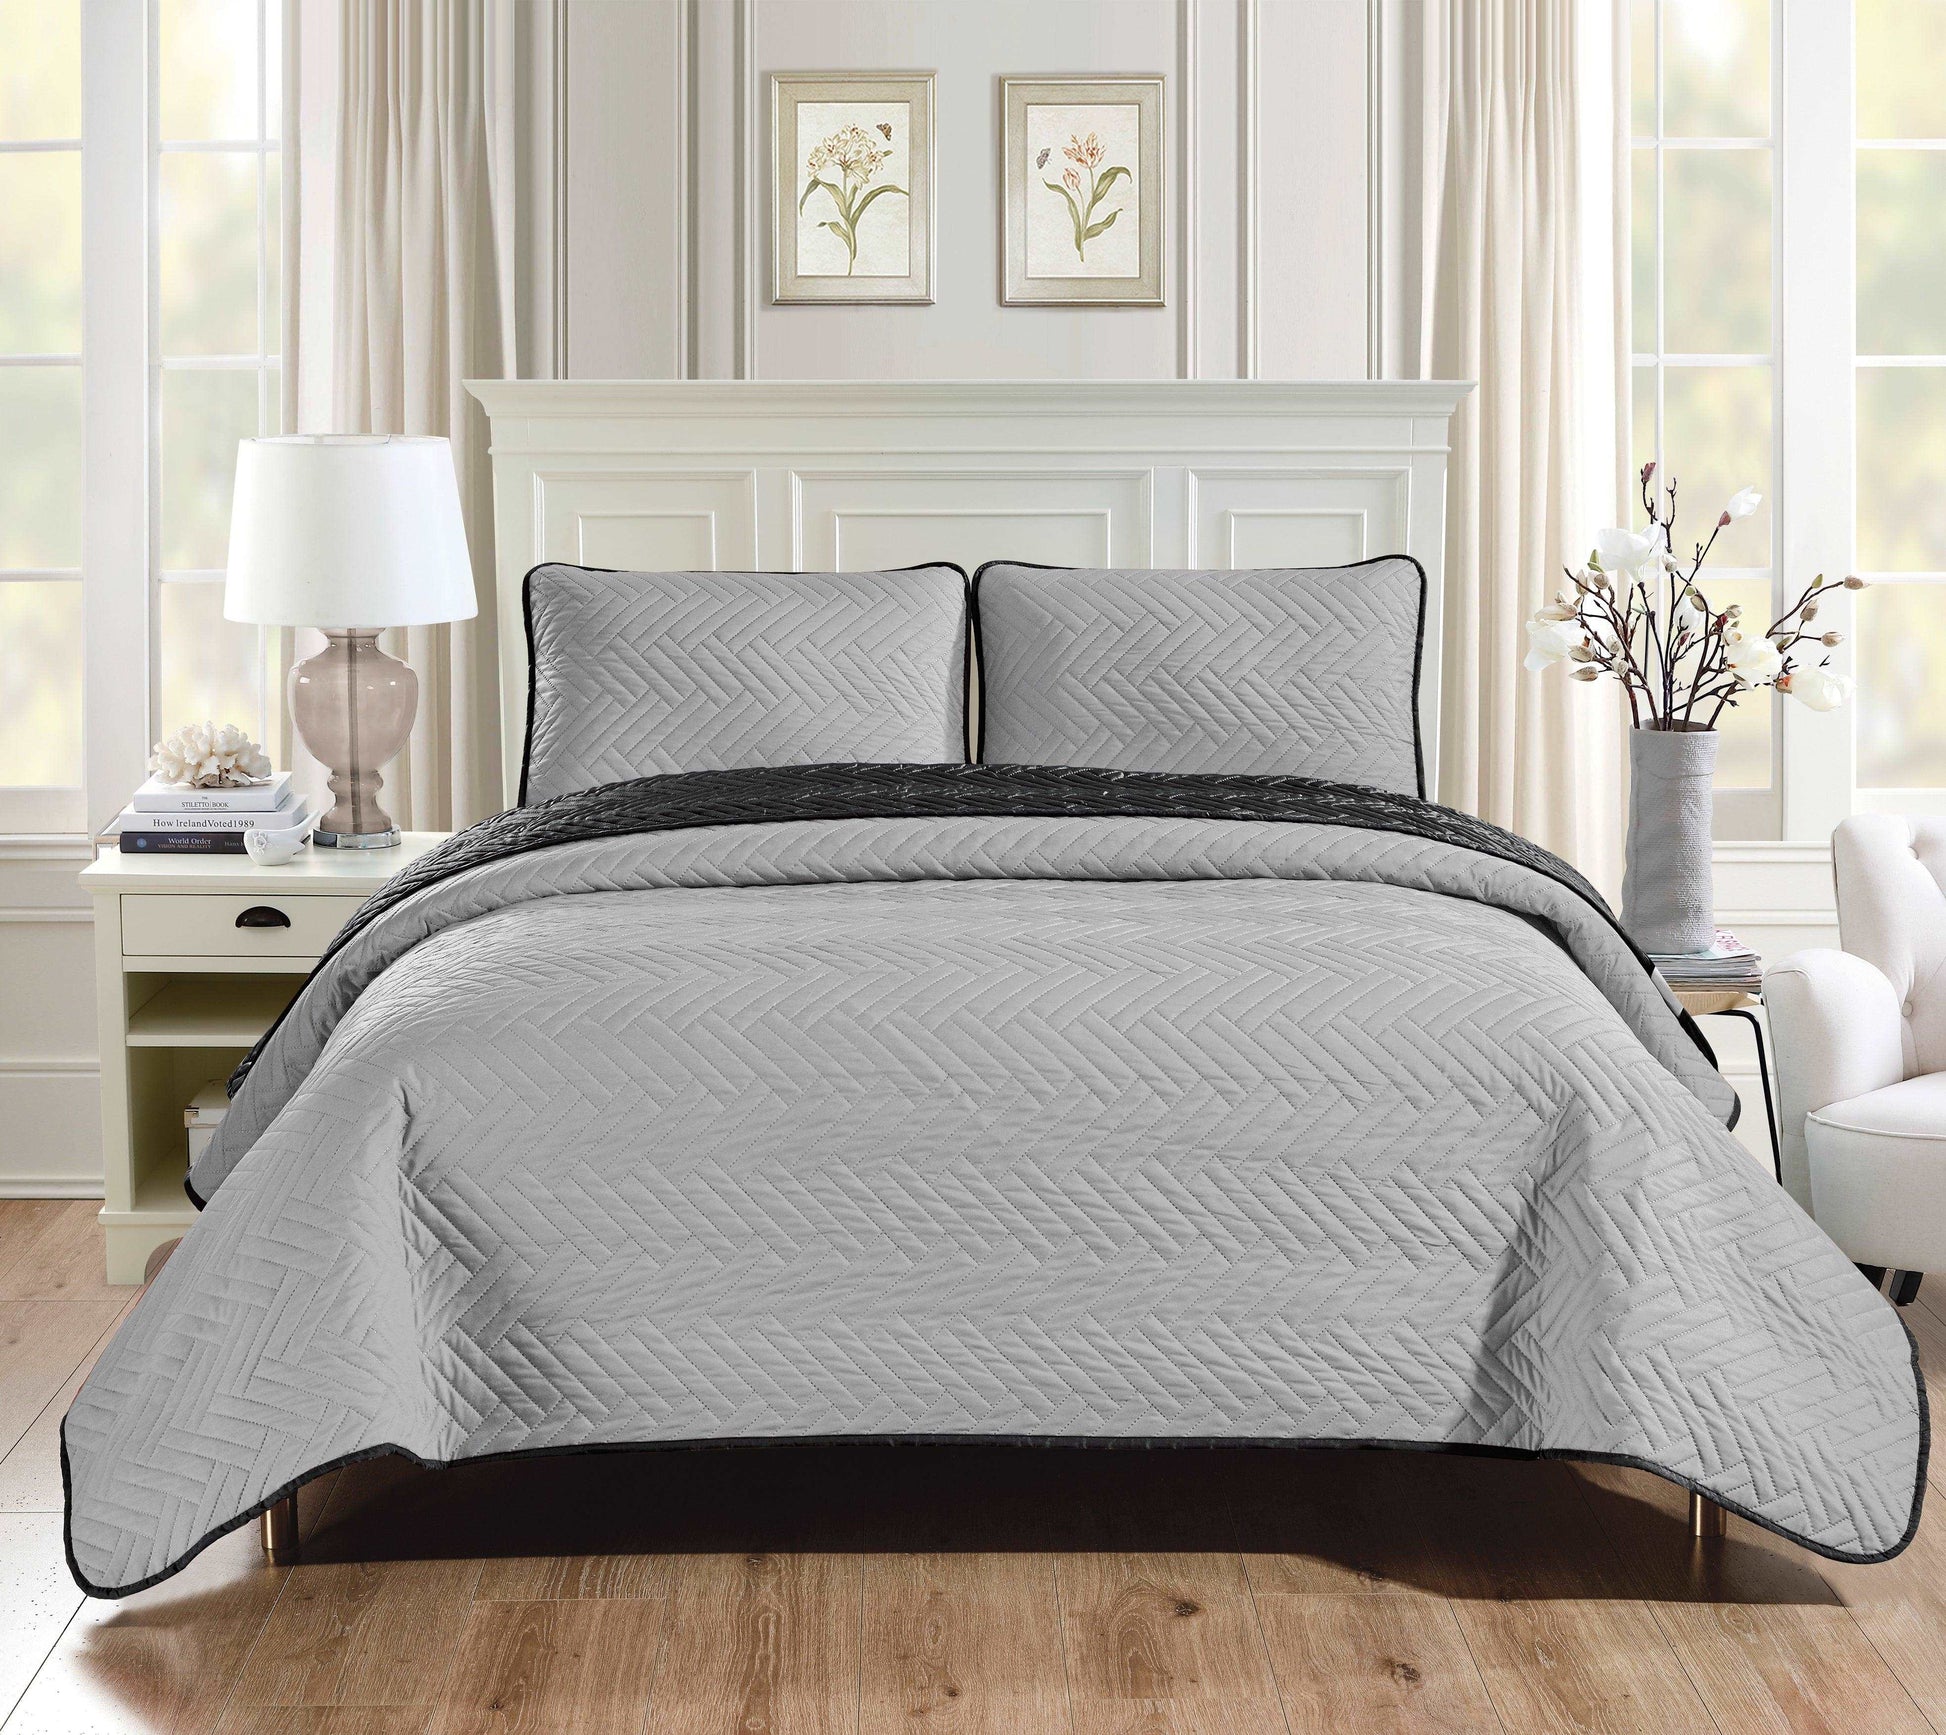 Linen World Navy/Gray / King “Sutton” 3 piece reversible quilt set with 2 shams